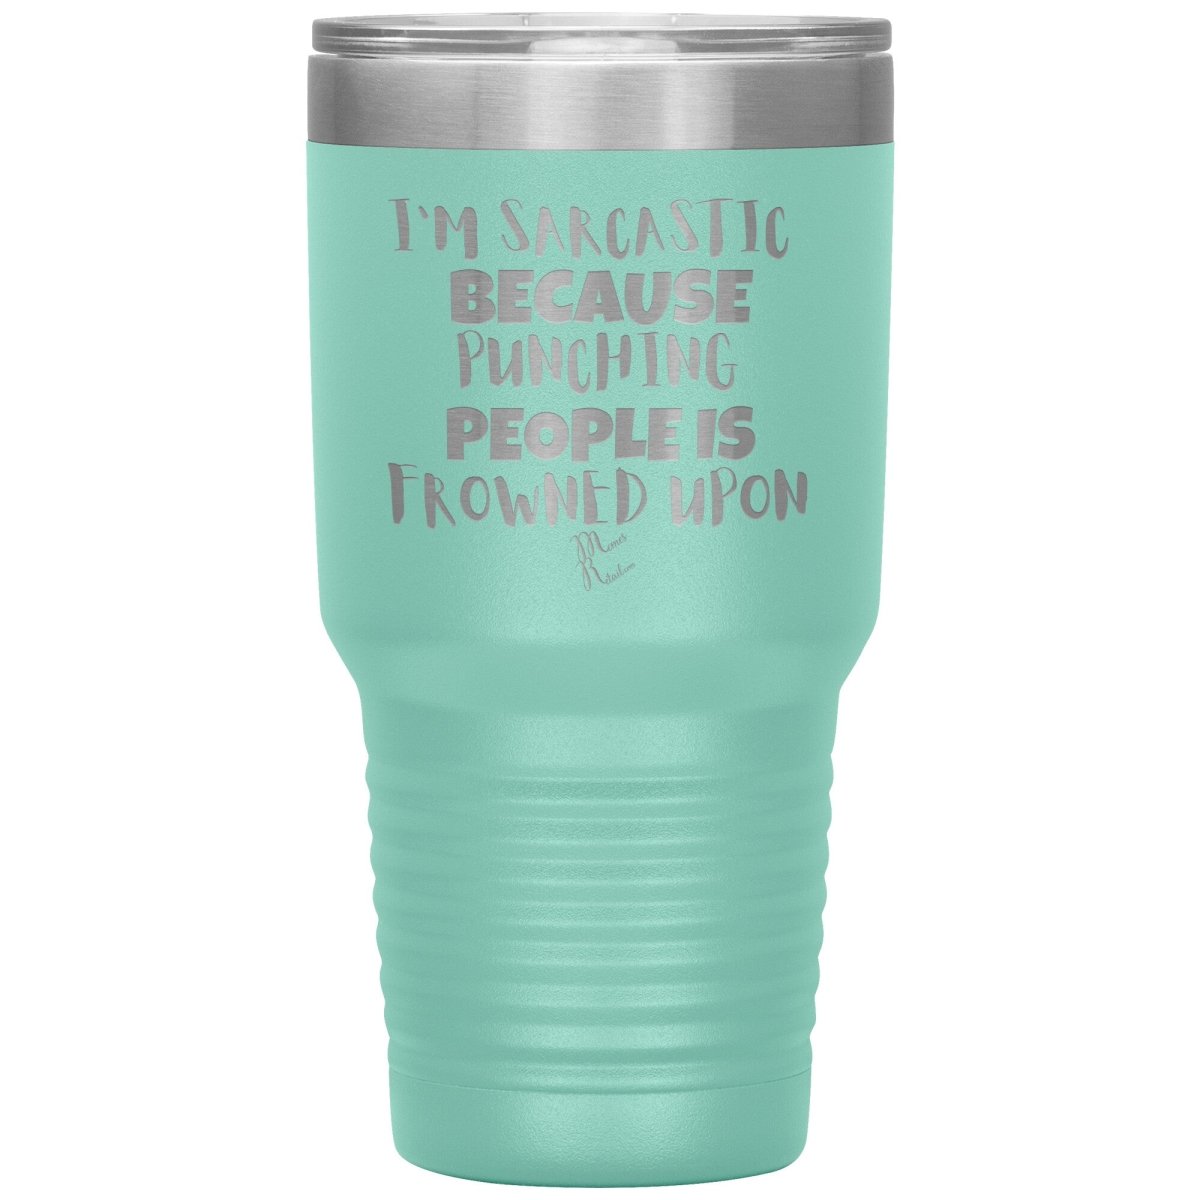 I'm Sarcastic Because Punching People is Frowned Upon Tumblers, 30oz Insulated Tumbler / Teal - MemesRetail.com